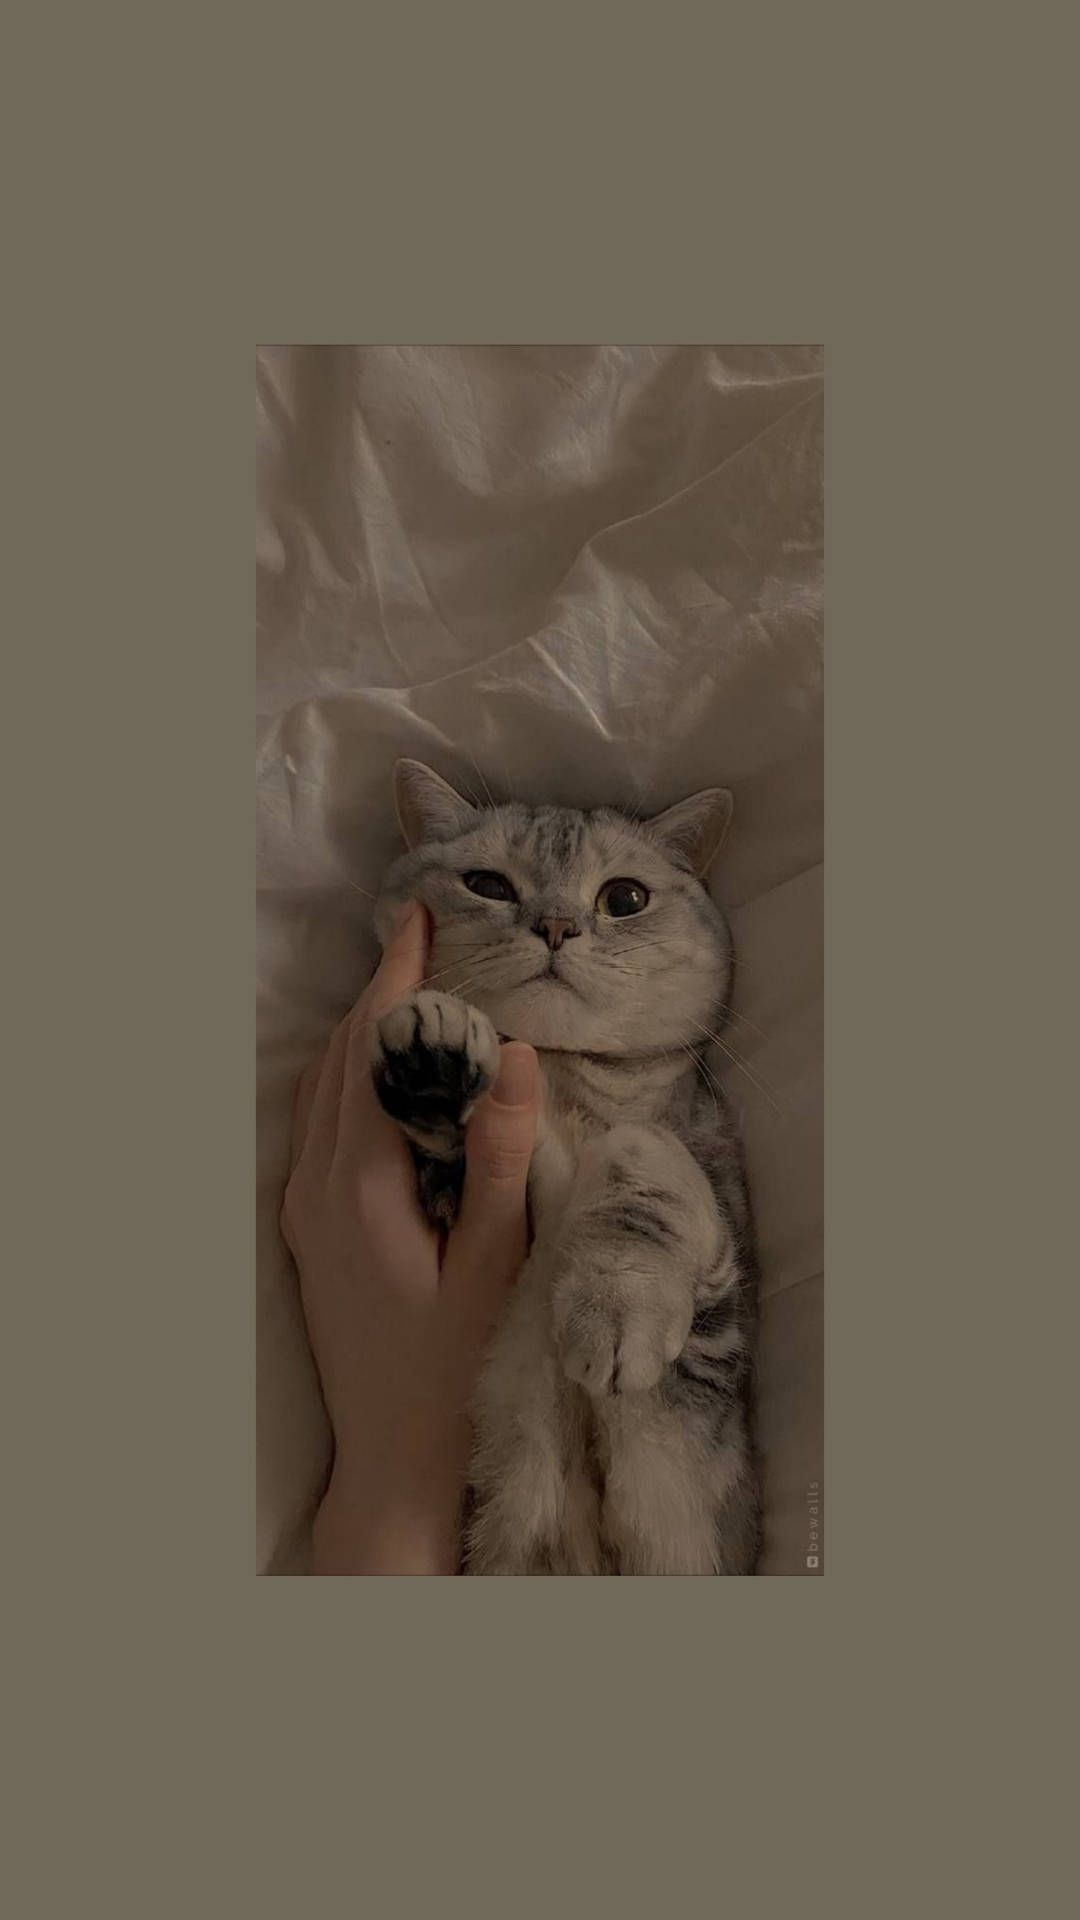 A cat with a paw on a person's hand - Cat